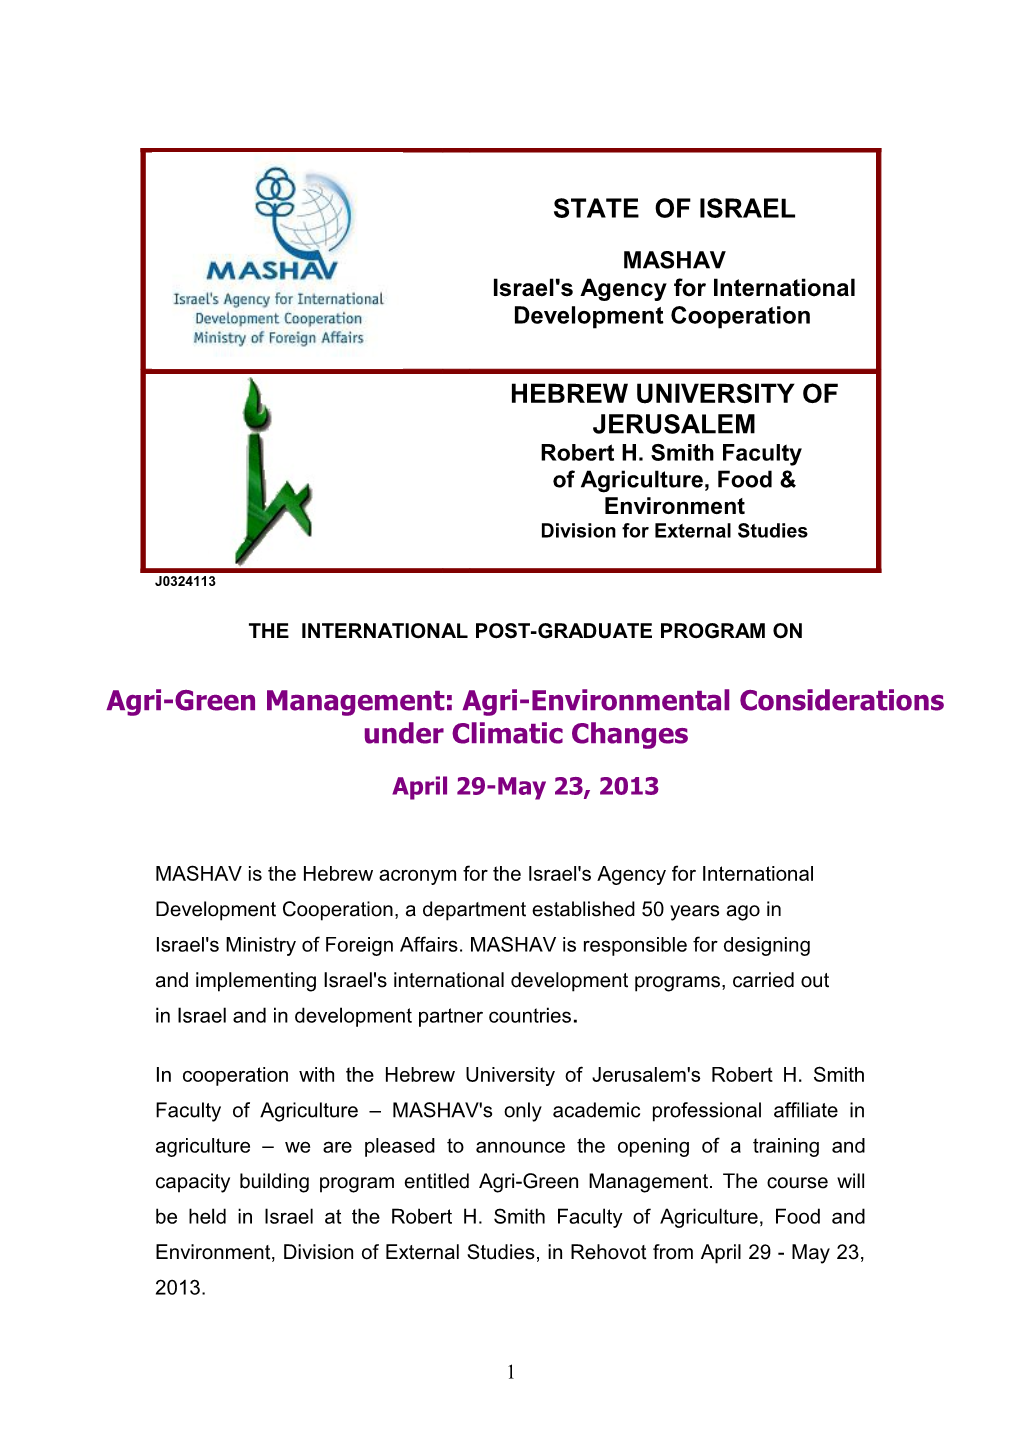 Agri-Green Management: Agri-Environmental Considerations Under Climatic Changes